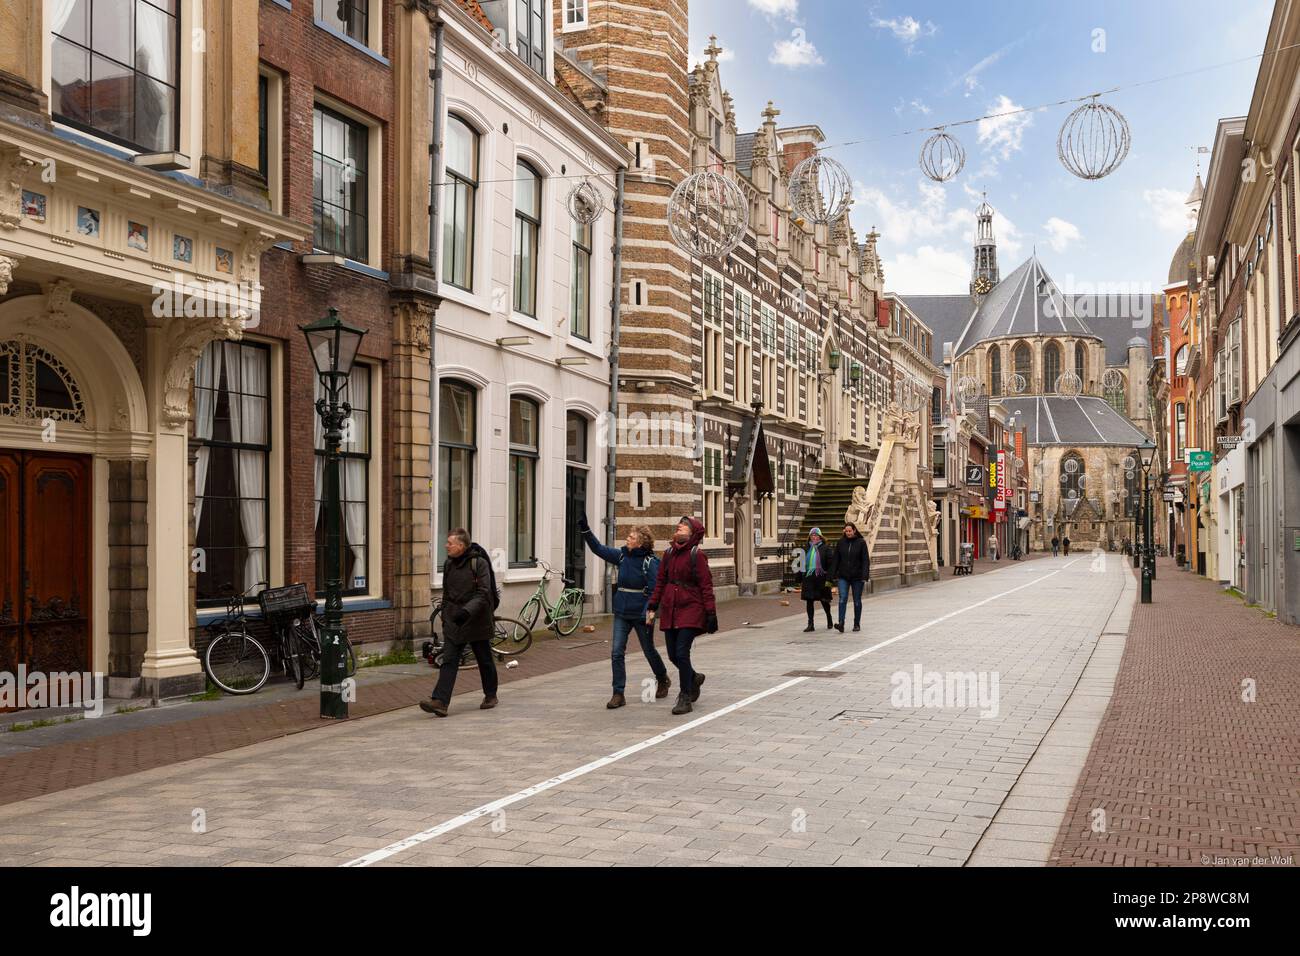 Shopping street in the center of Alkmaar with the Great St. Laurens Church in the background. Stock Photo